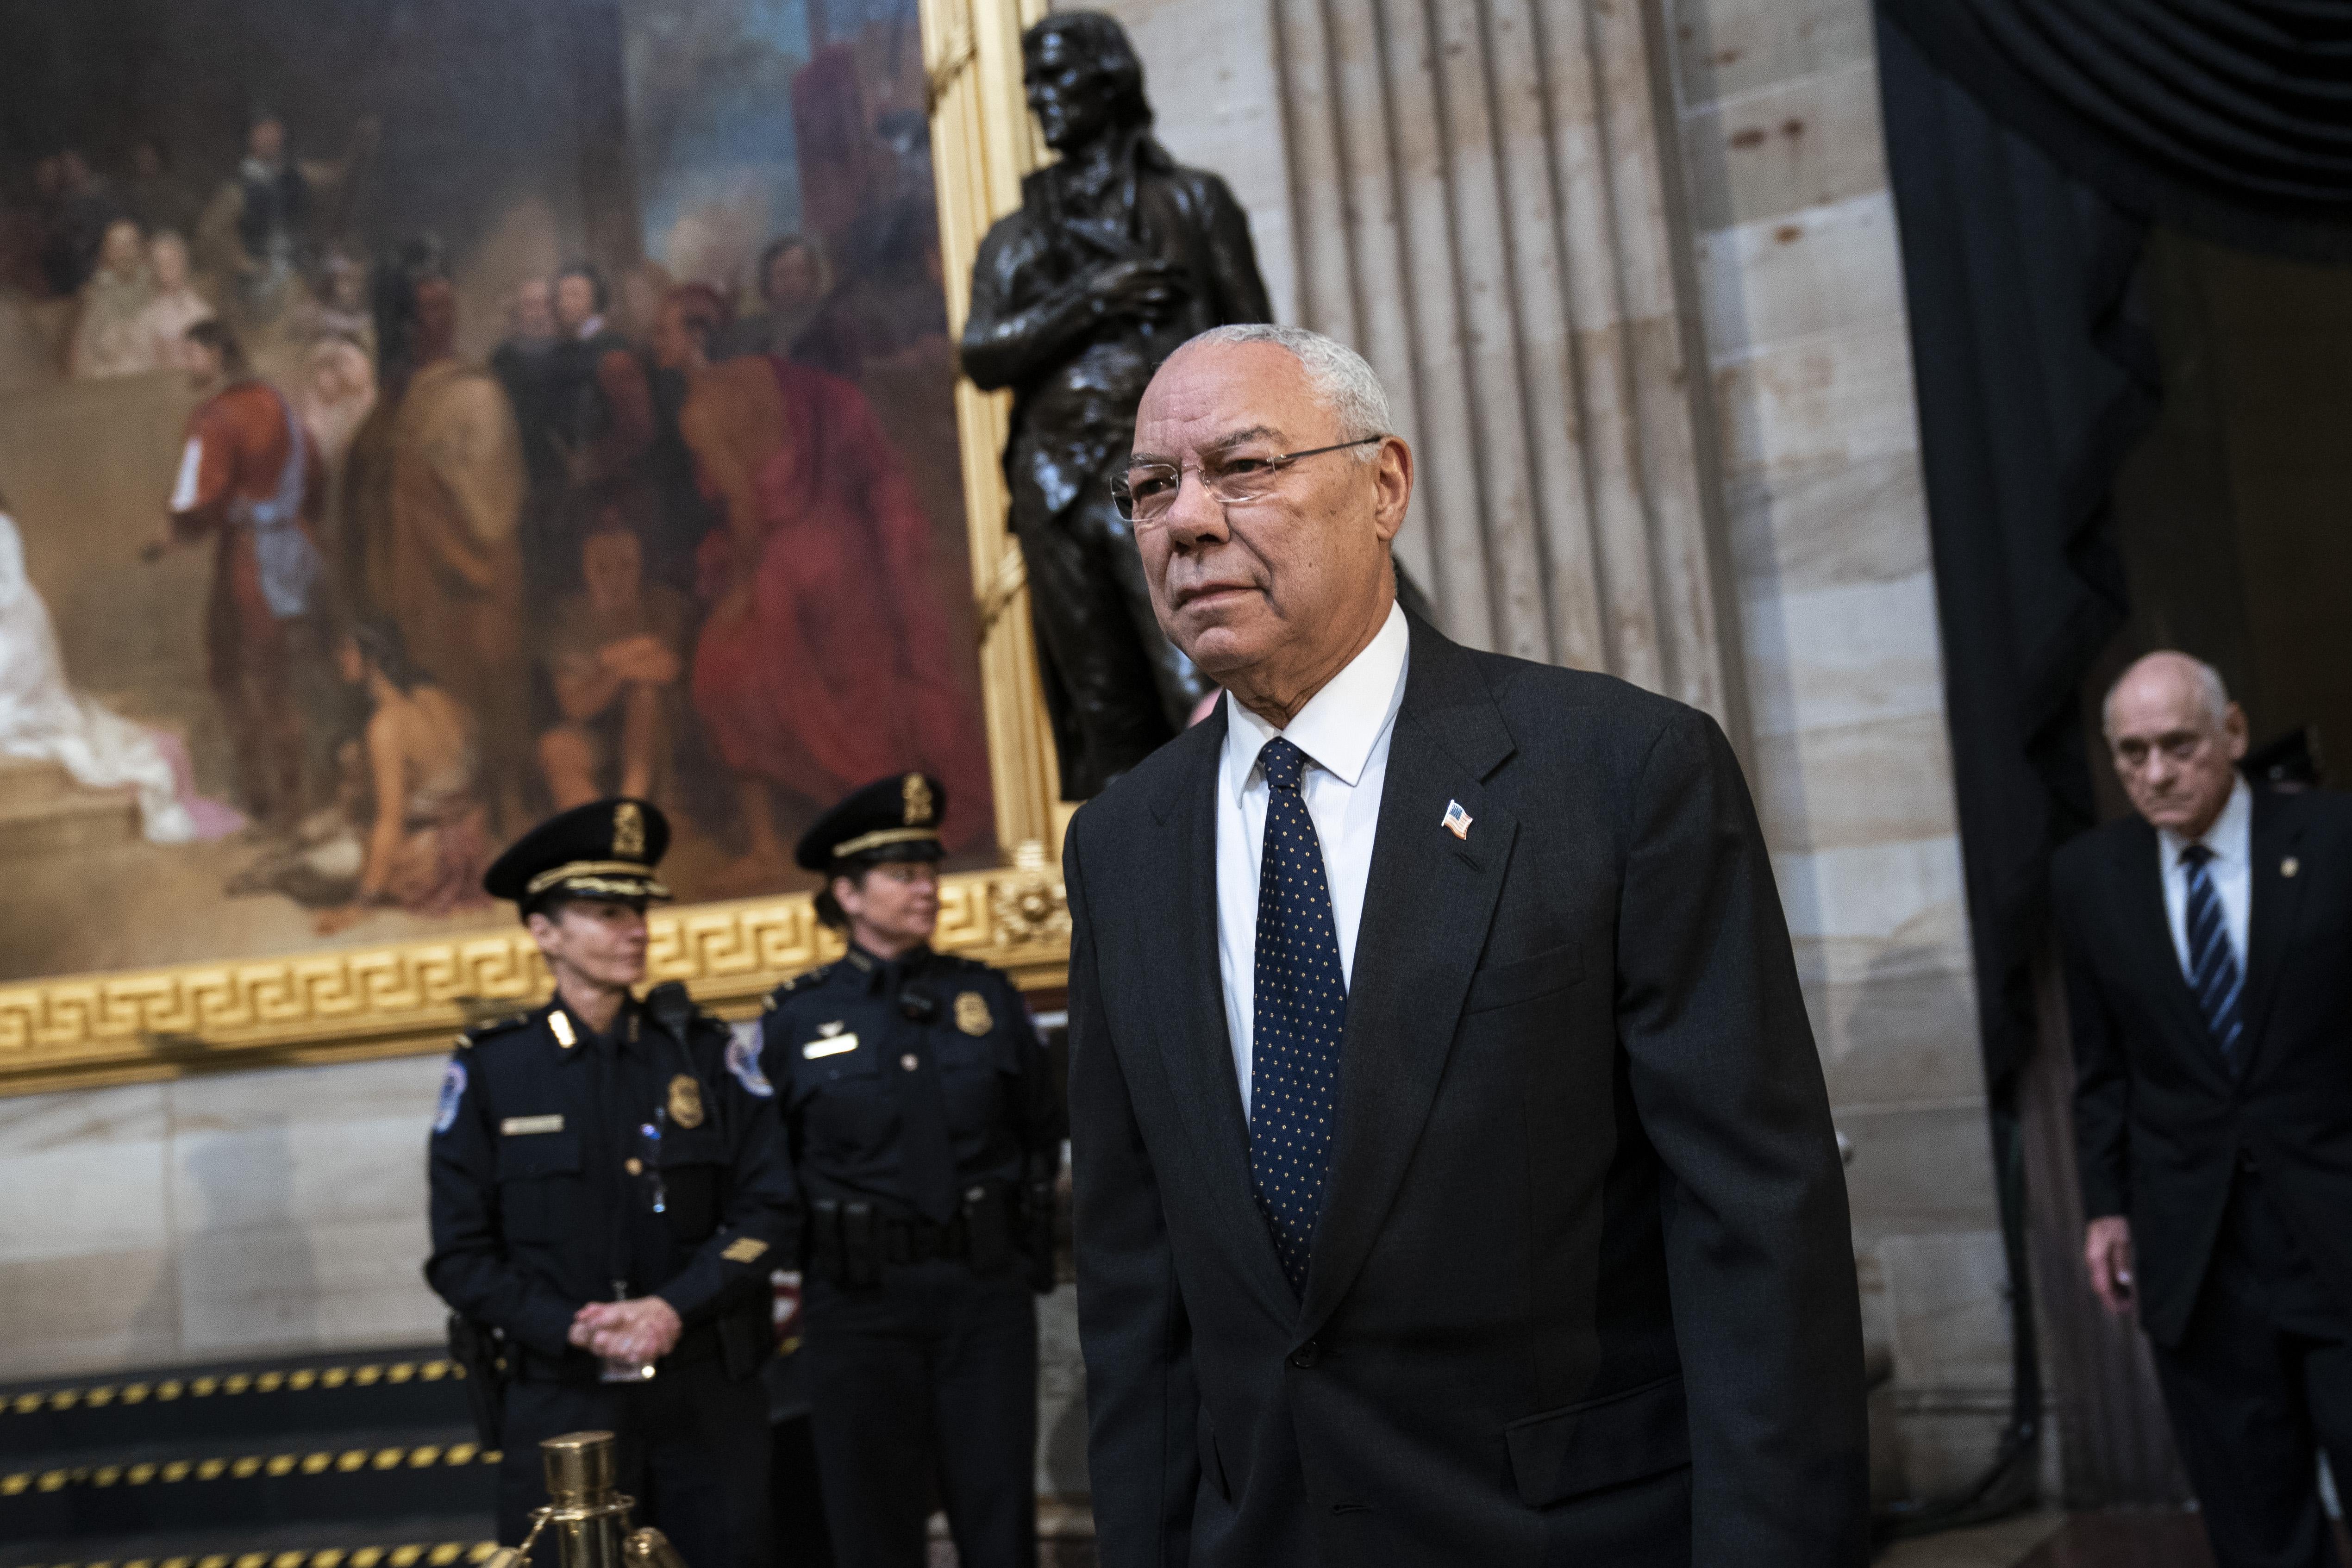 Colin Powell arrives to pay his respects at the casket of the late former President George H.W. Bush as he lies in state at the Capitol